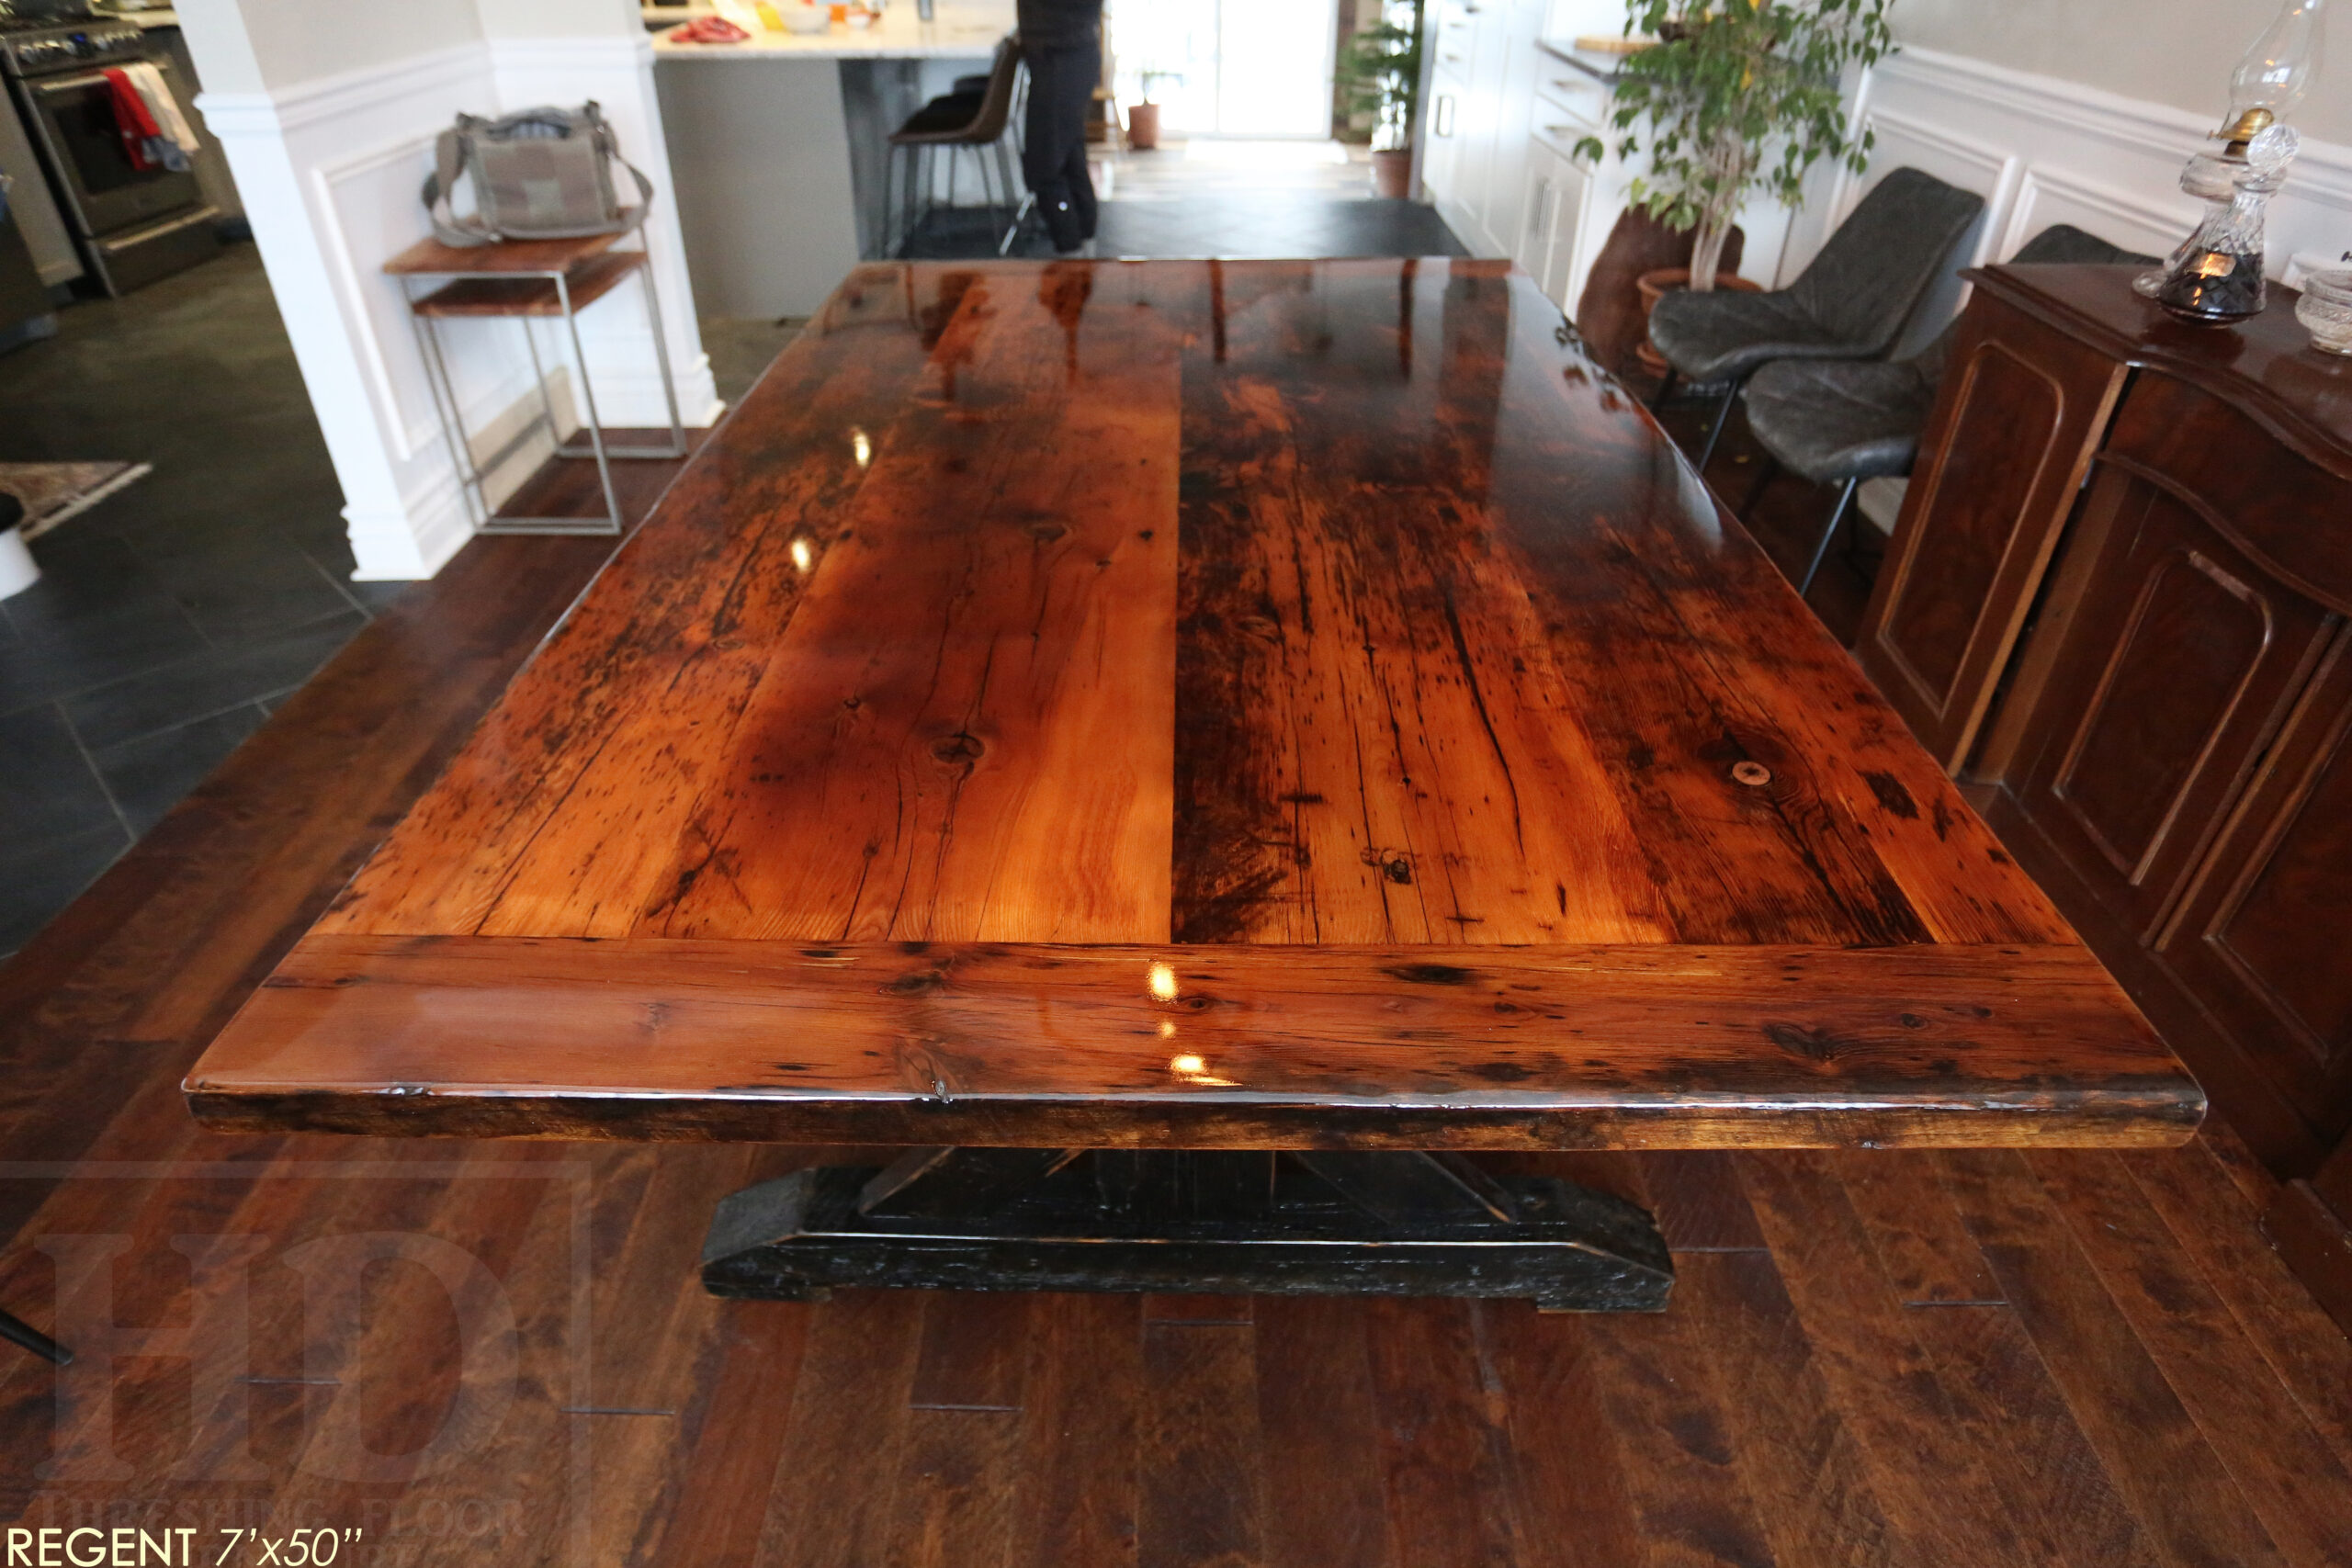 7 ft Reclaimed Ontario Barnwood Table we made for a Cambridge, Ontario home - 50â€ wide â€“ Sawbuck Base - Reclaimed Hemlock Threshing Floor Construction â€“ Original edges & distressing maintained â€“ Premium epoxy + High Gloss Option polyurethane finish â€“ Black painted with sandthroughs base - www.table.ca